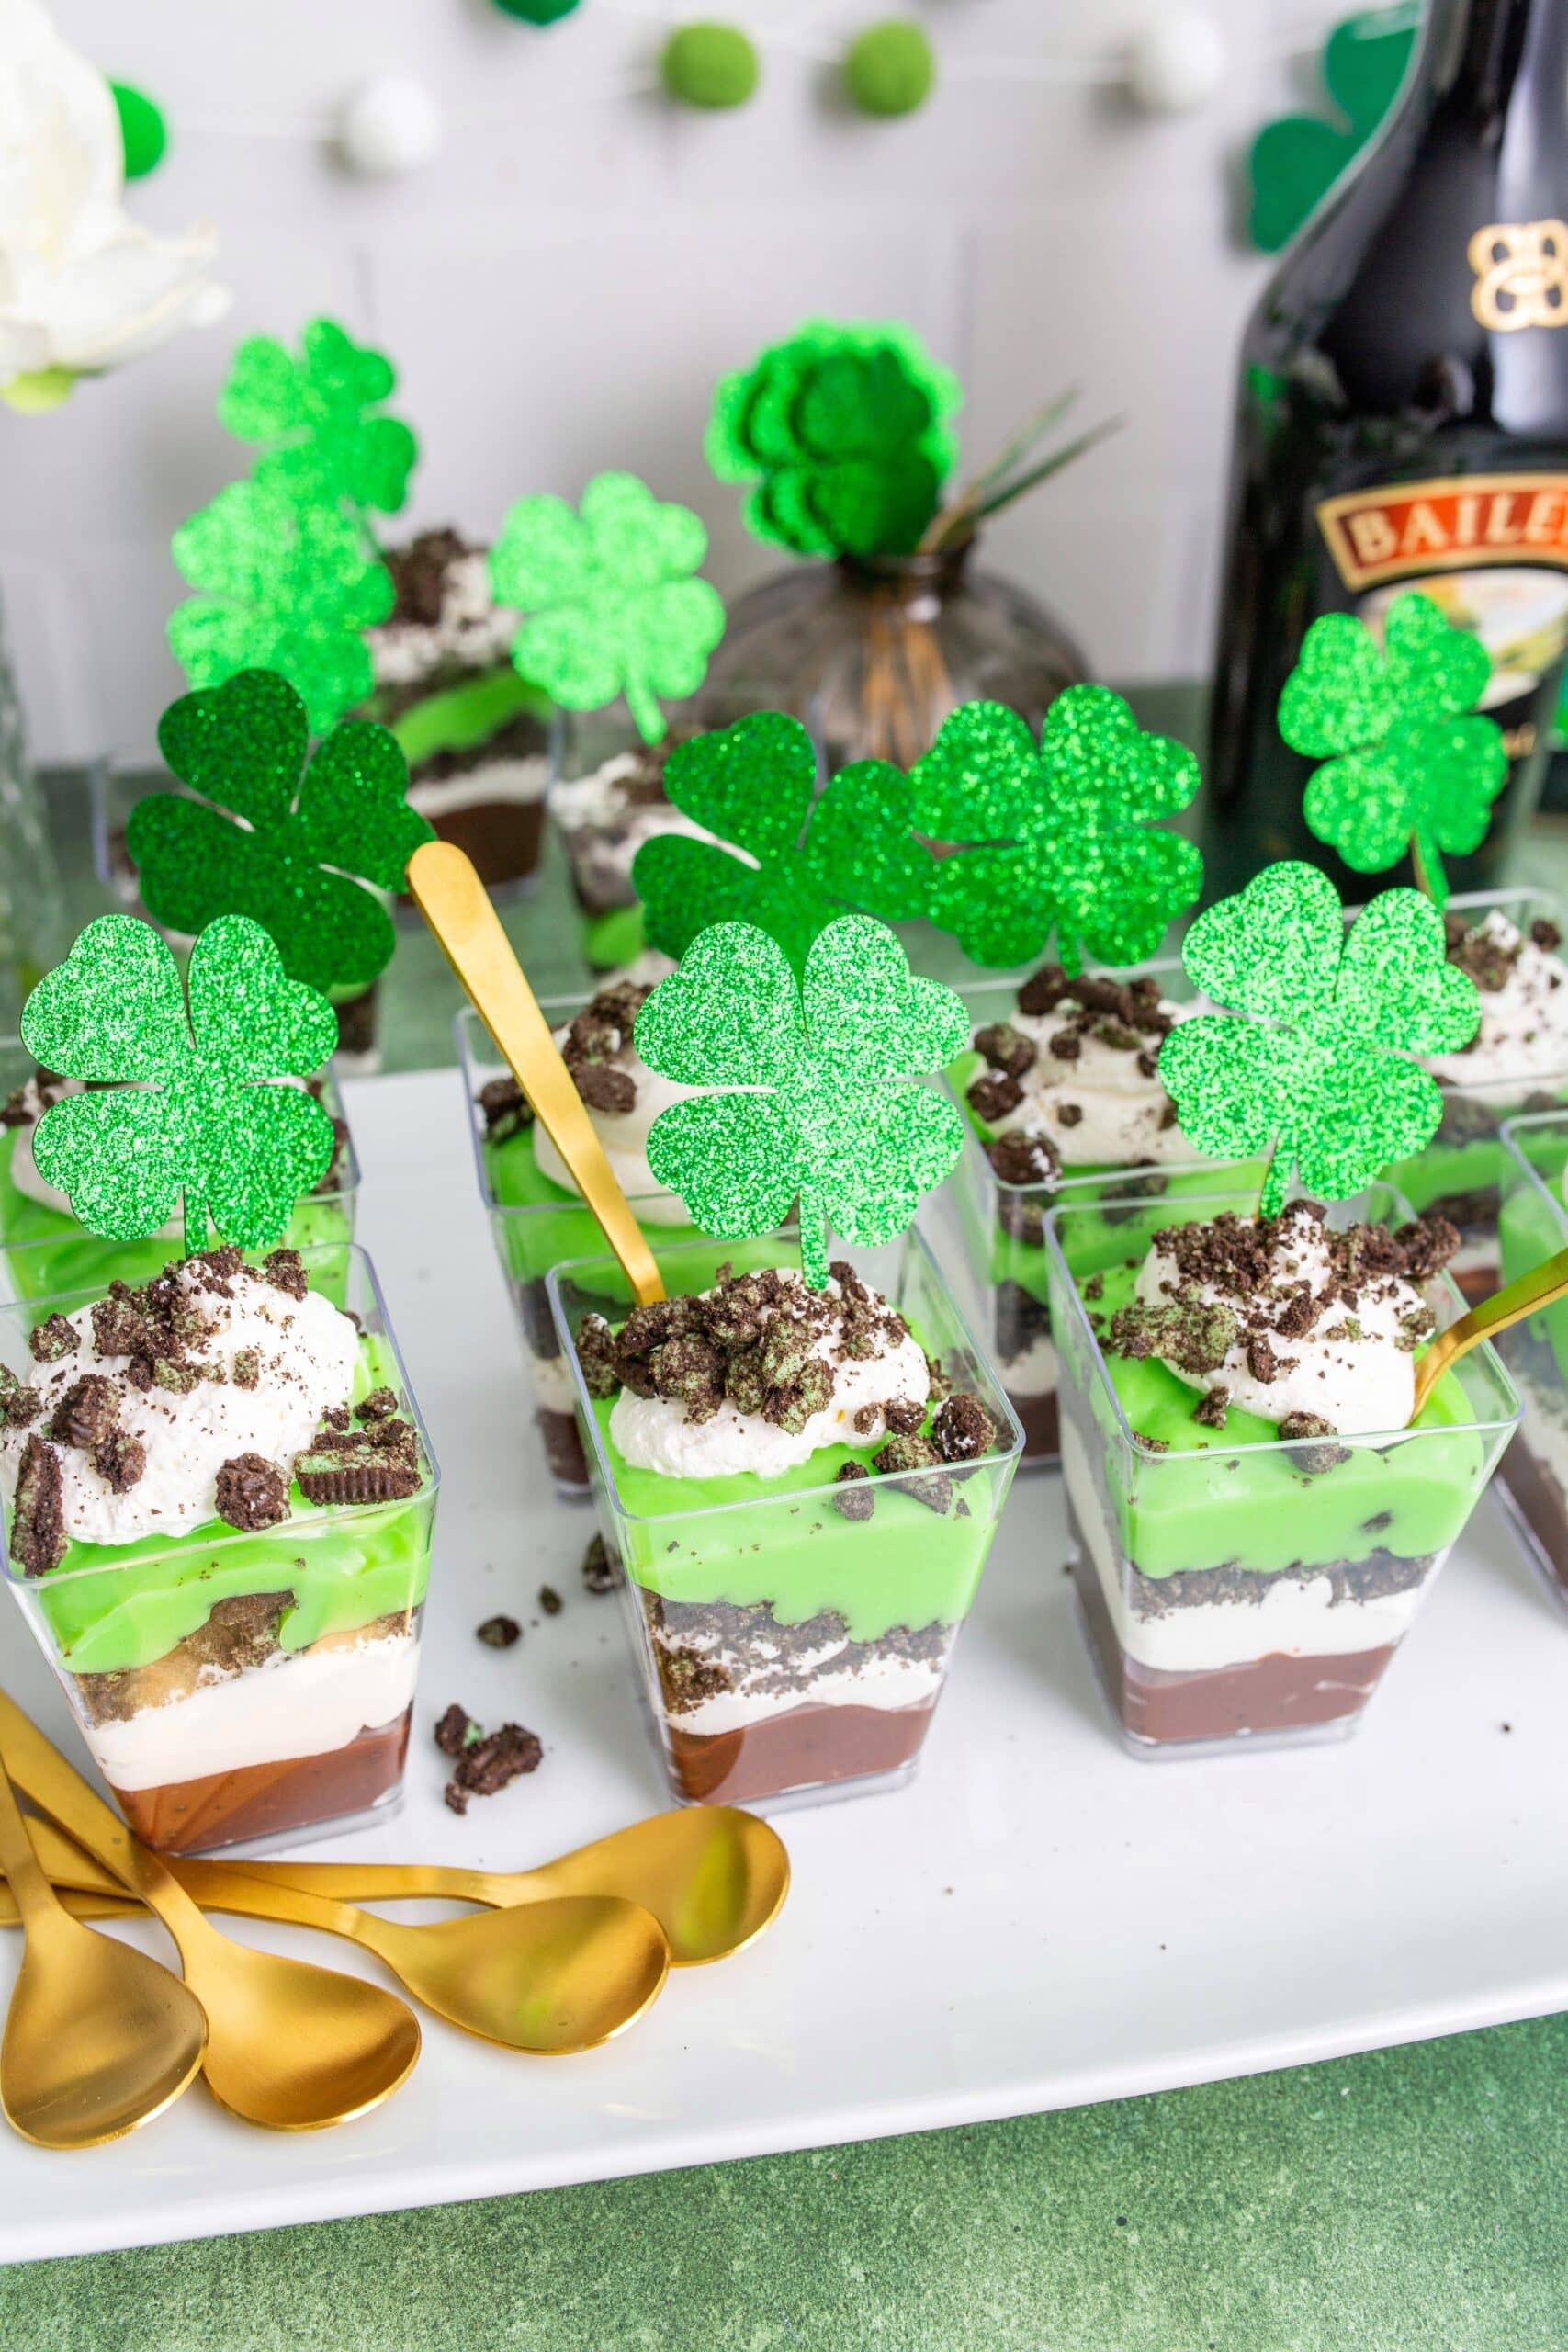 St. Patrick's Day pudding shots with Baileys and crème de menthe